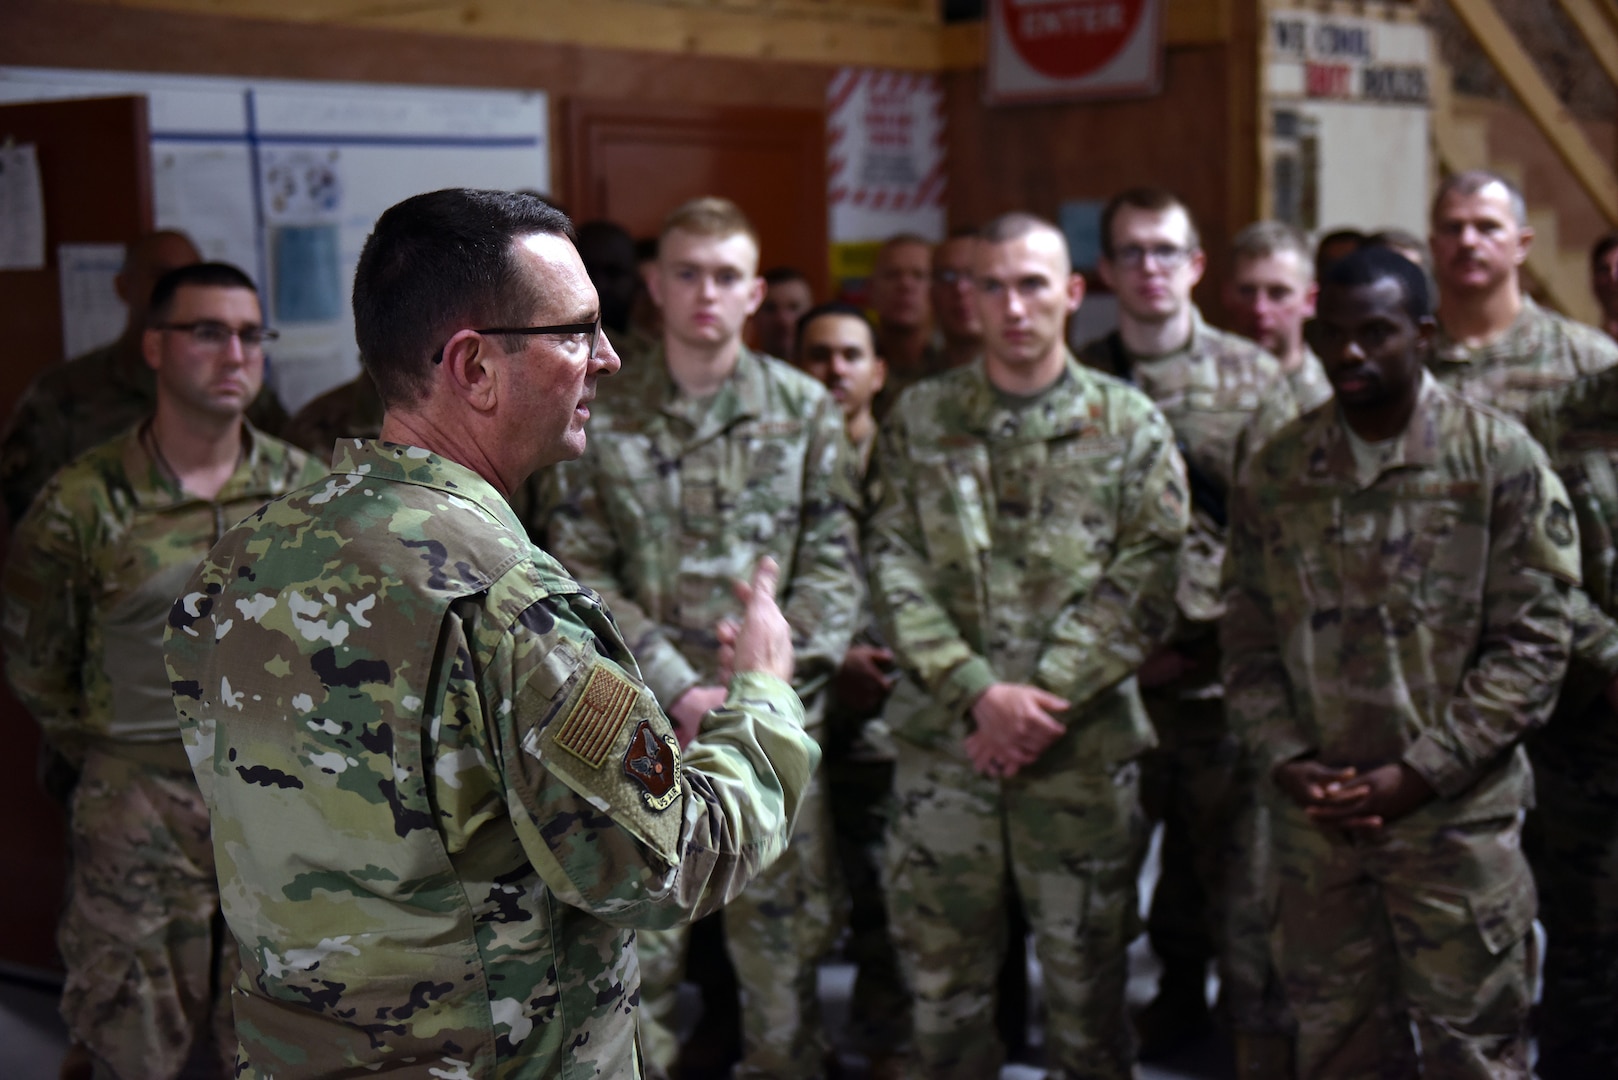 Air Force Gen. Joseph Lengyel, chief, National Guard Bureau, talks with troops during Thanksgiving holiday visits to units in three countries, Kuwait, Nov. 27, 2019.